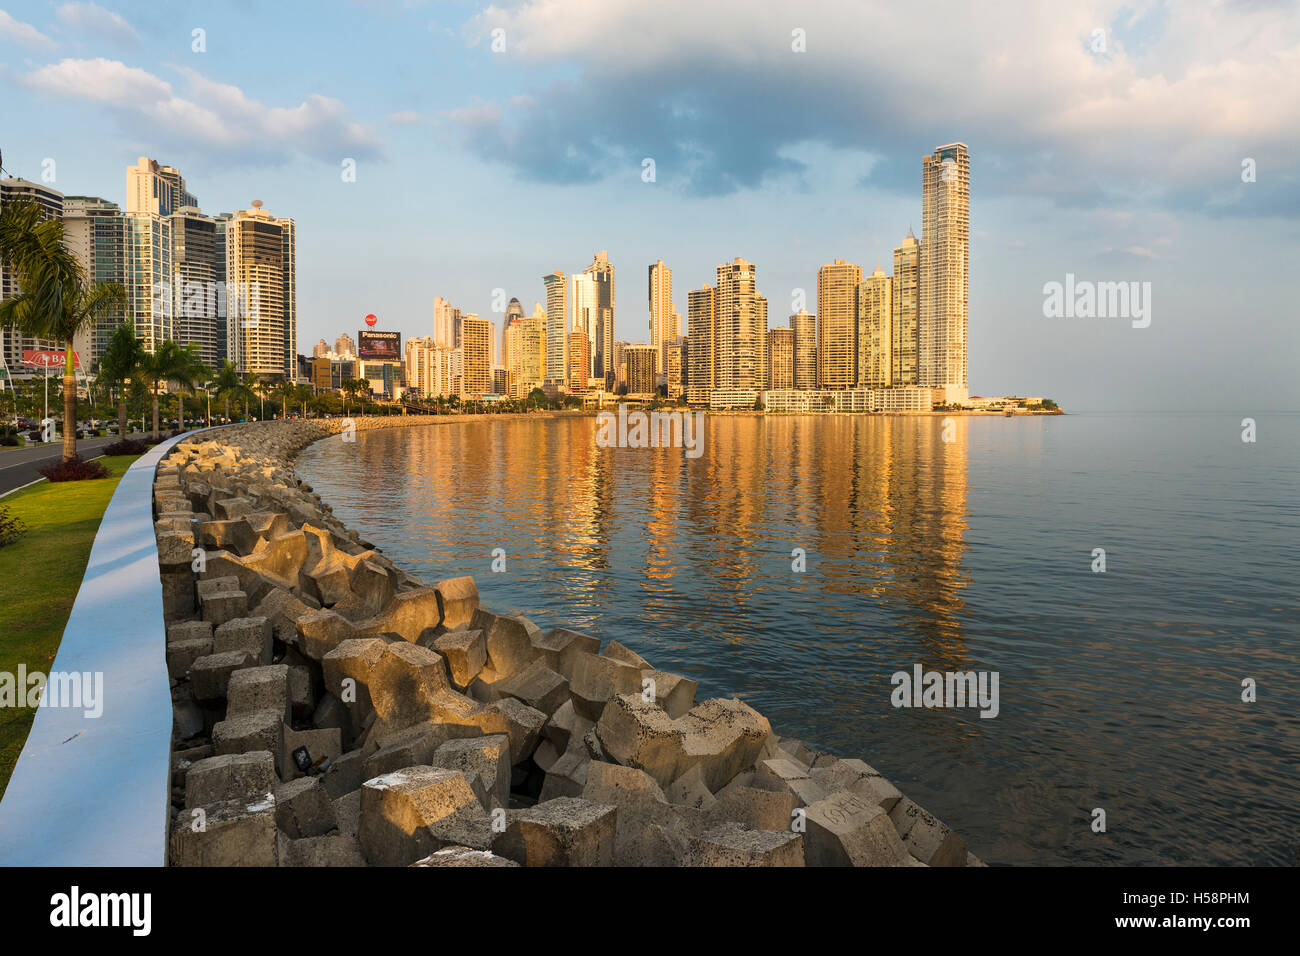 Panama City, Panama - March 18, 2014: View of the financial district and sea in Panama City, Panama, at sunset. Stock Photo